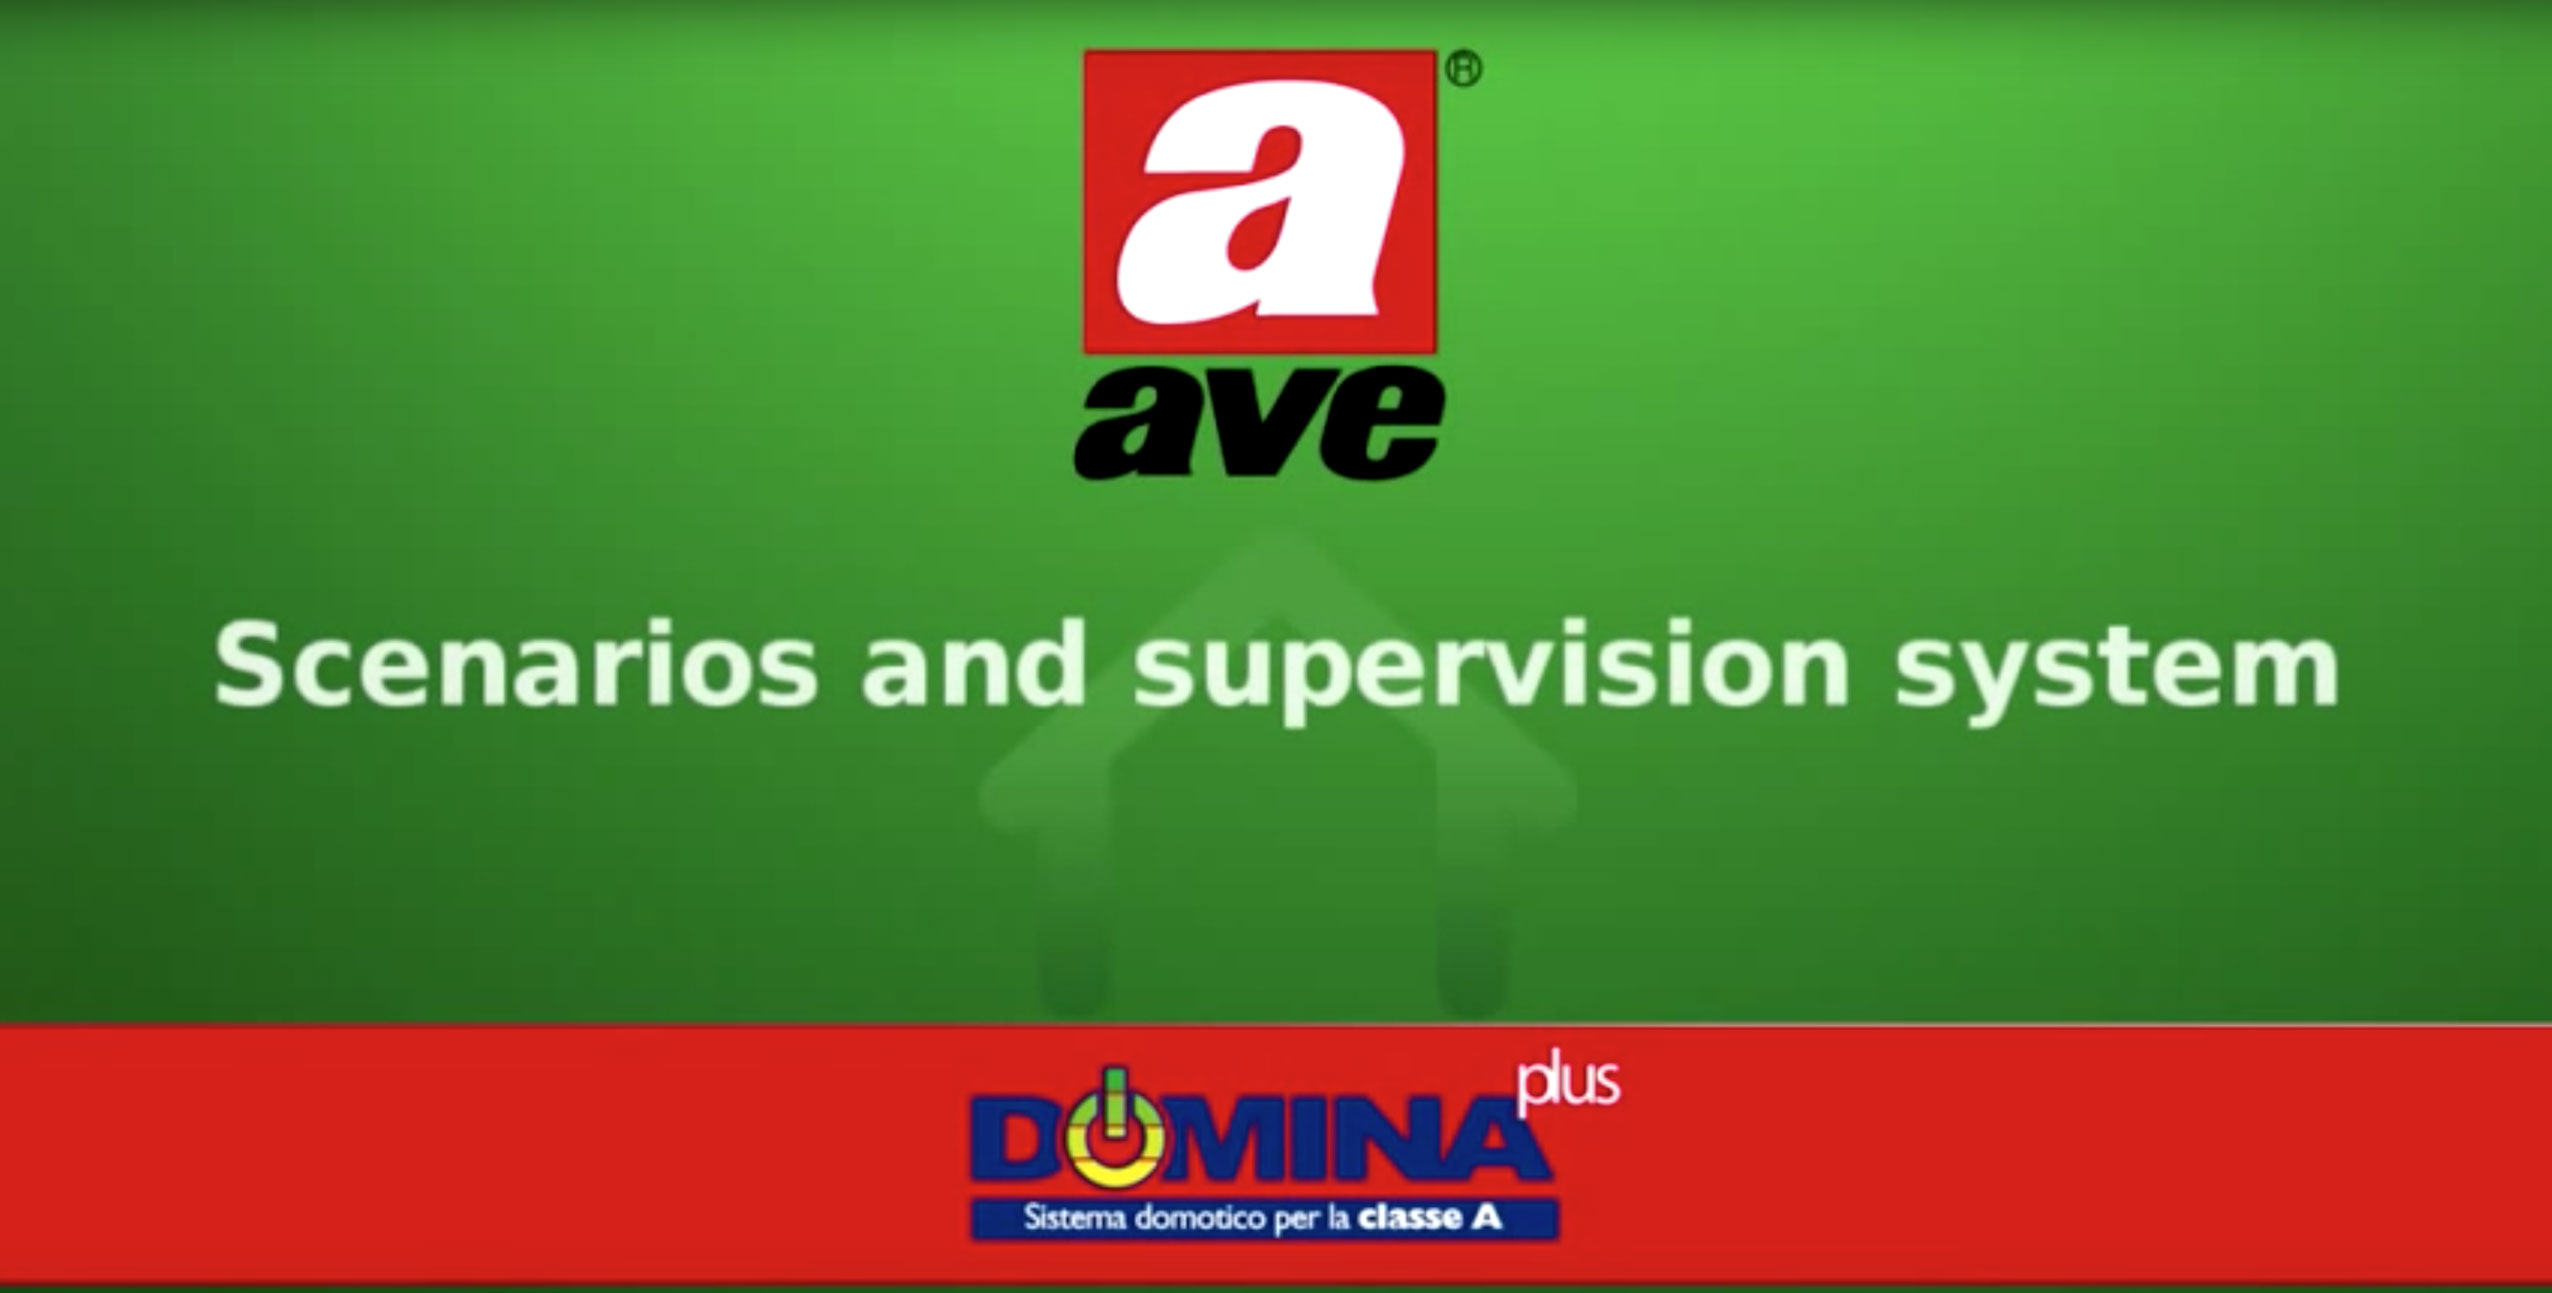 Home automation AVE DOMINA plus - Scenarios and supervision of the system video